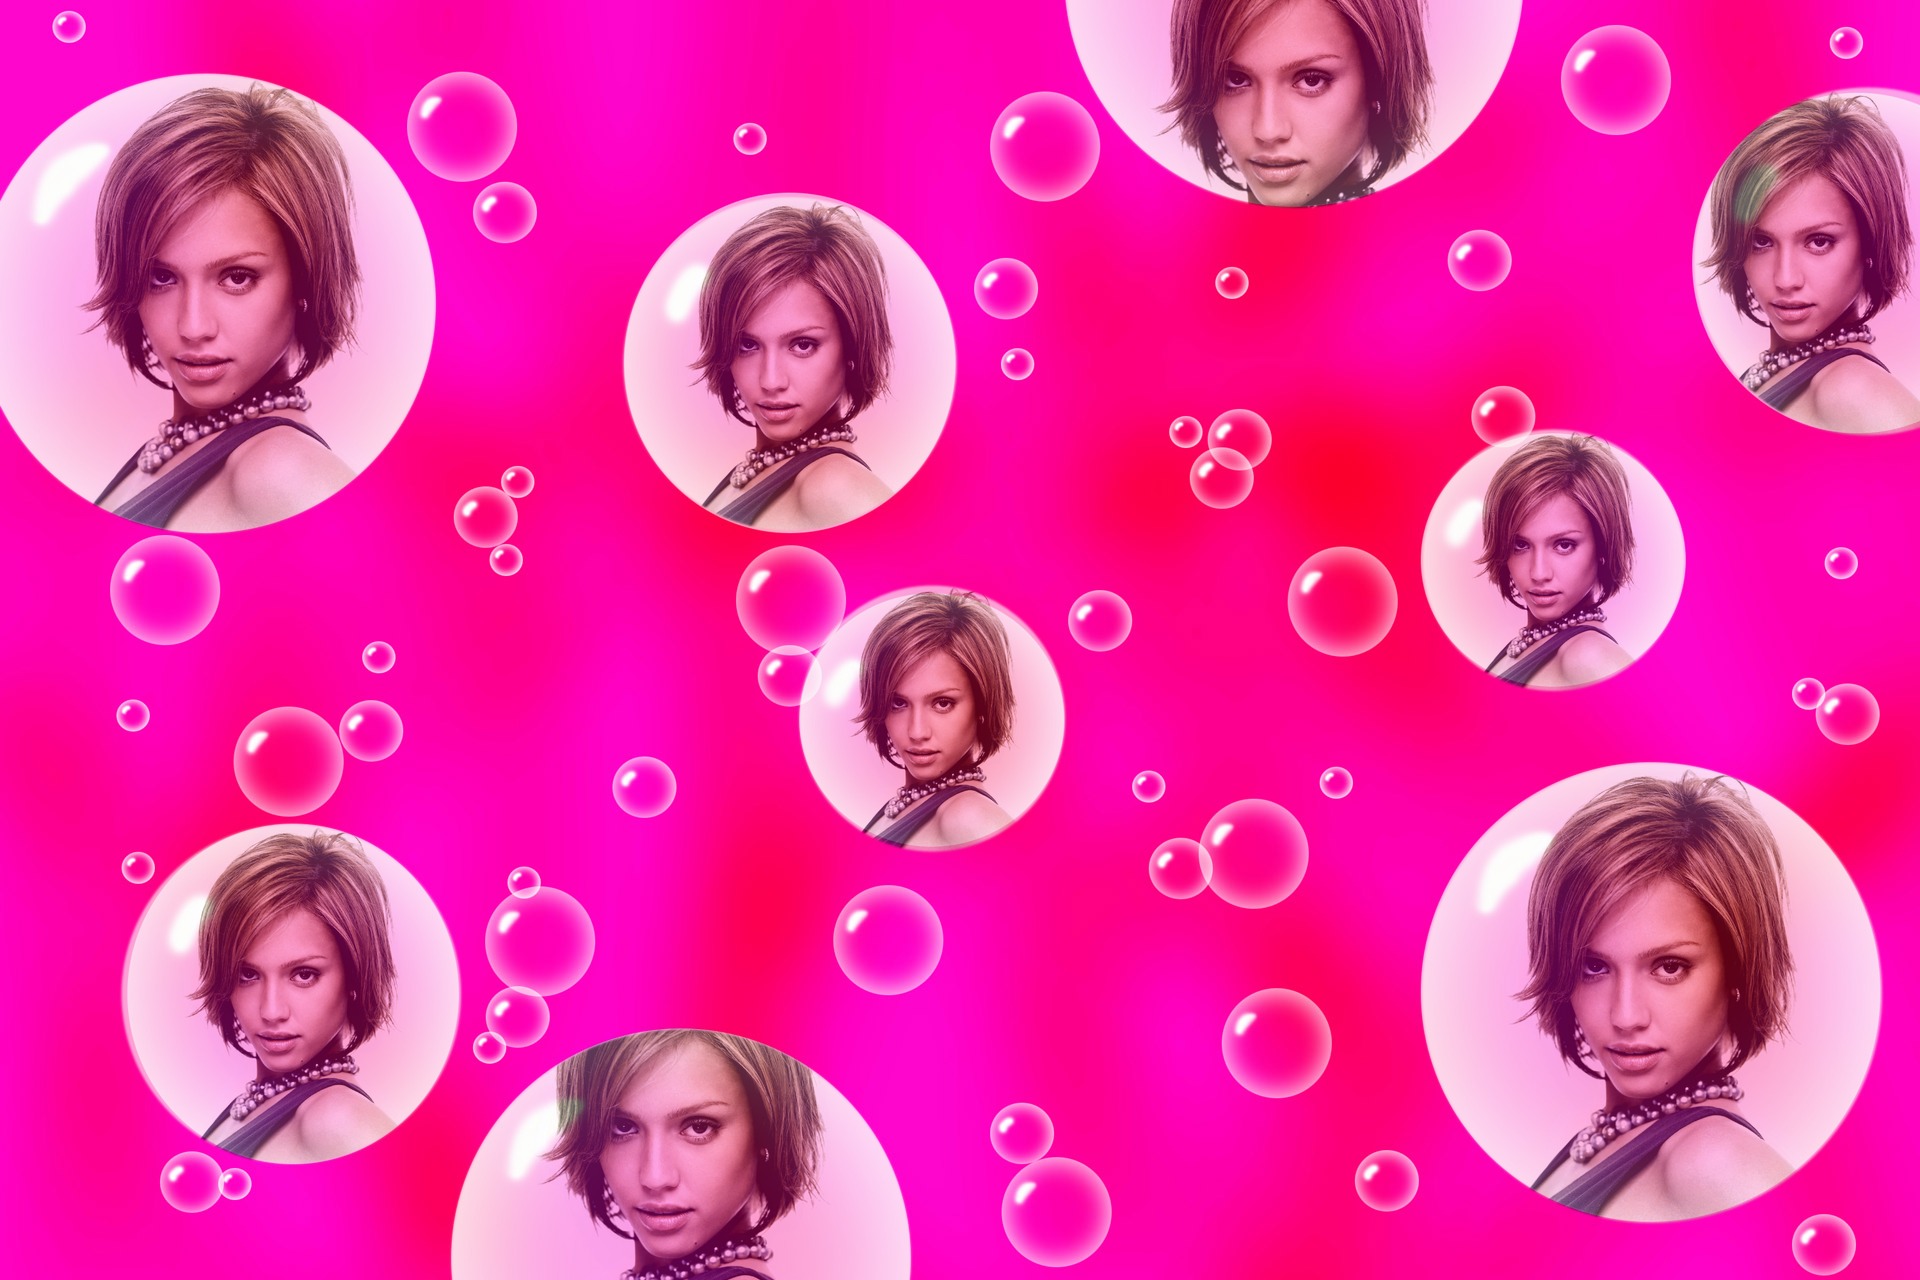 9 bulles roses Montage photo